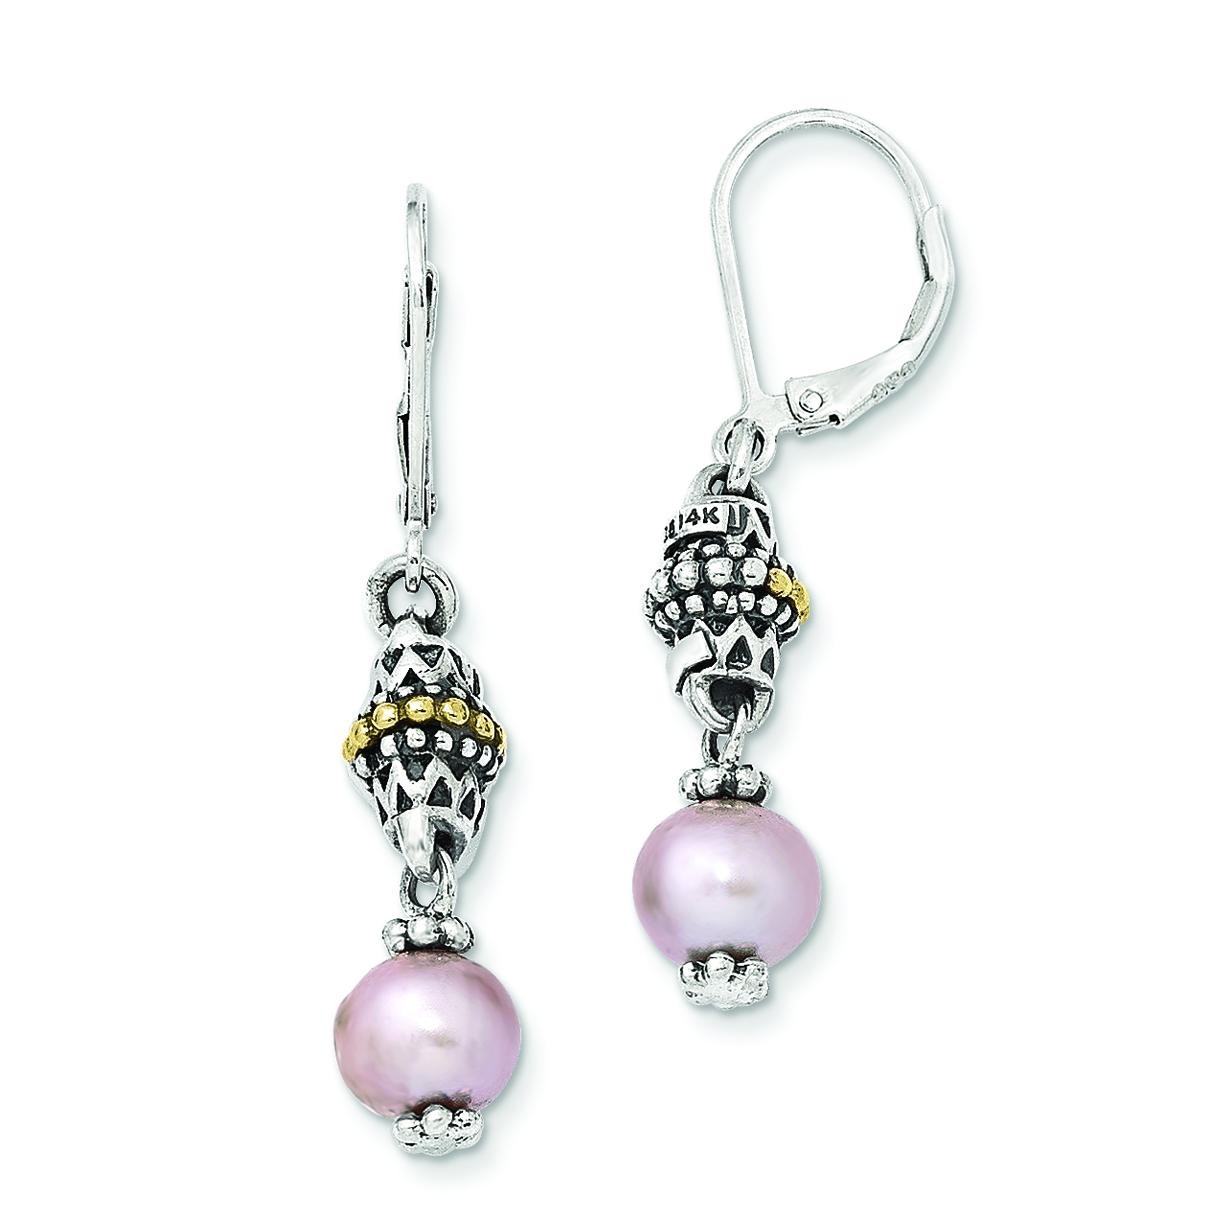 W Pink Freshwater Cultured Pearl Earrings in 14k Yellow Gold & Sterling Silver